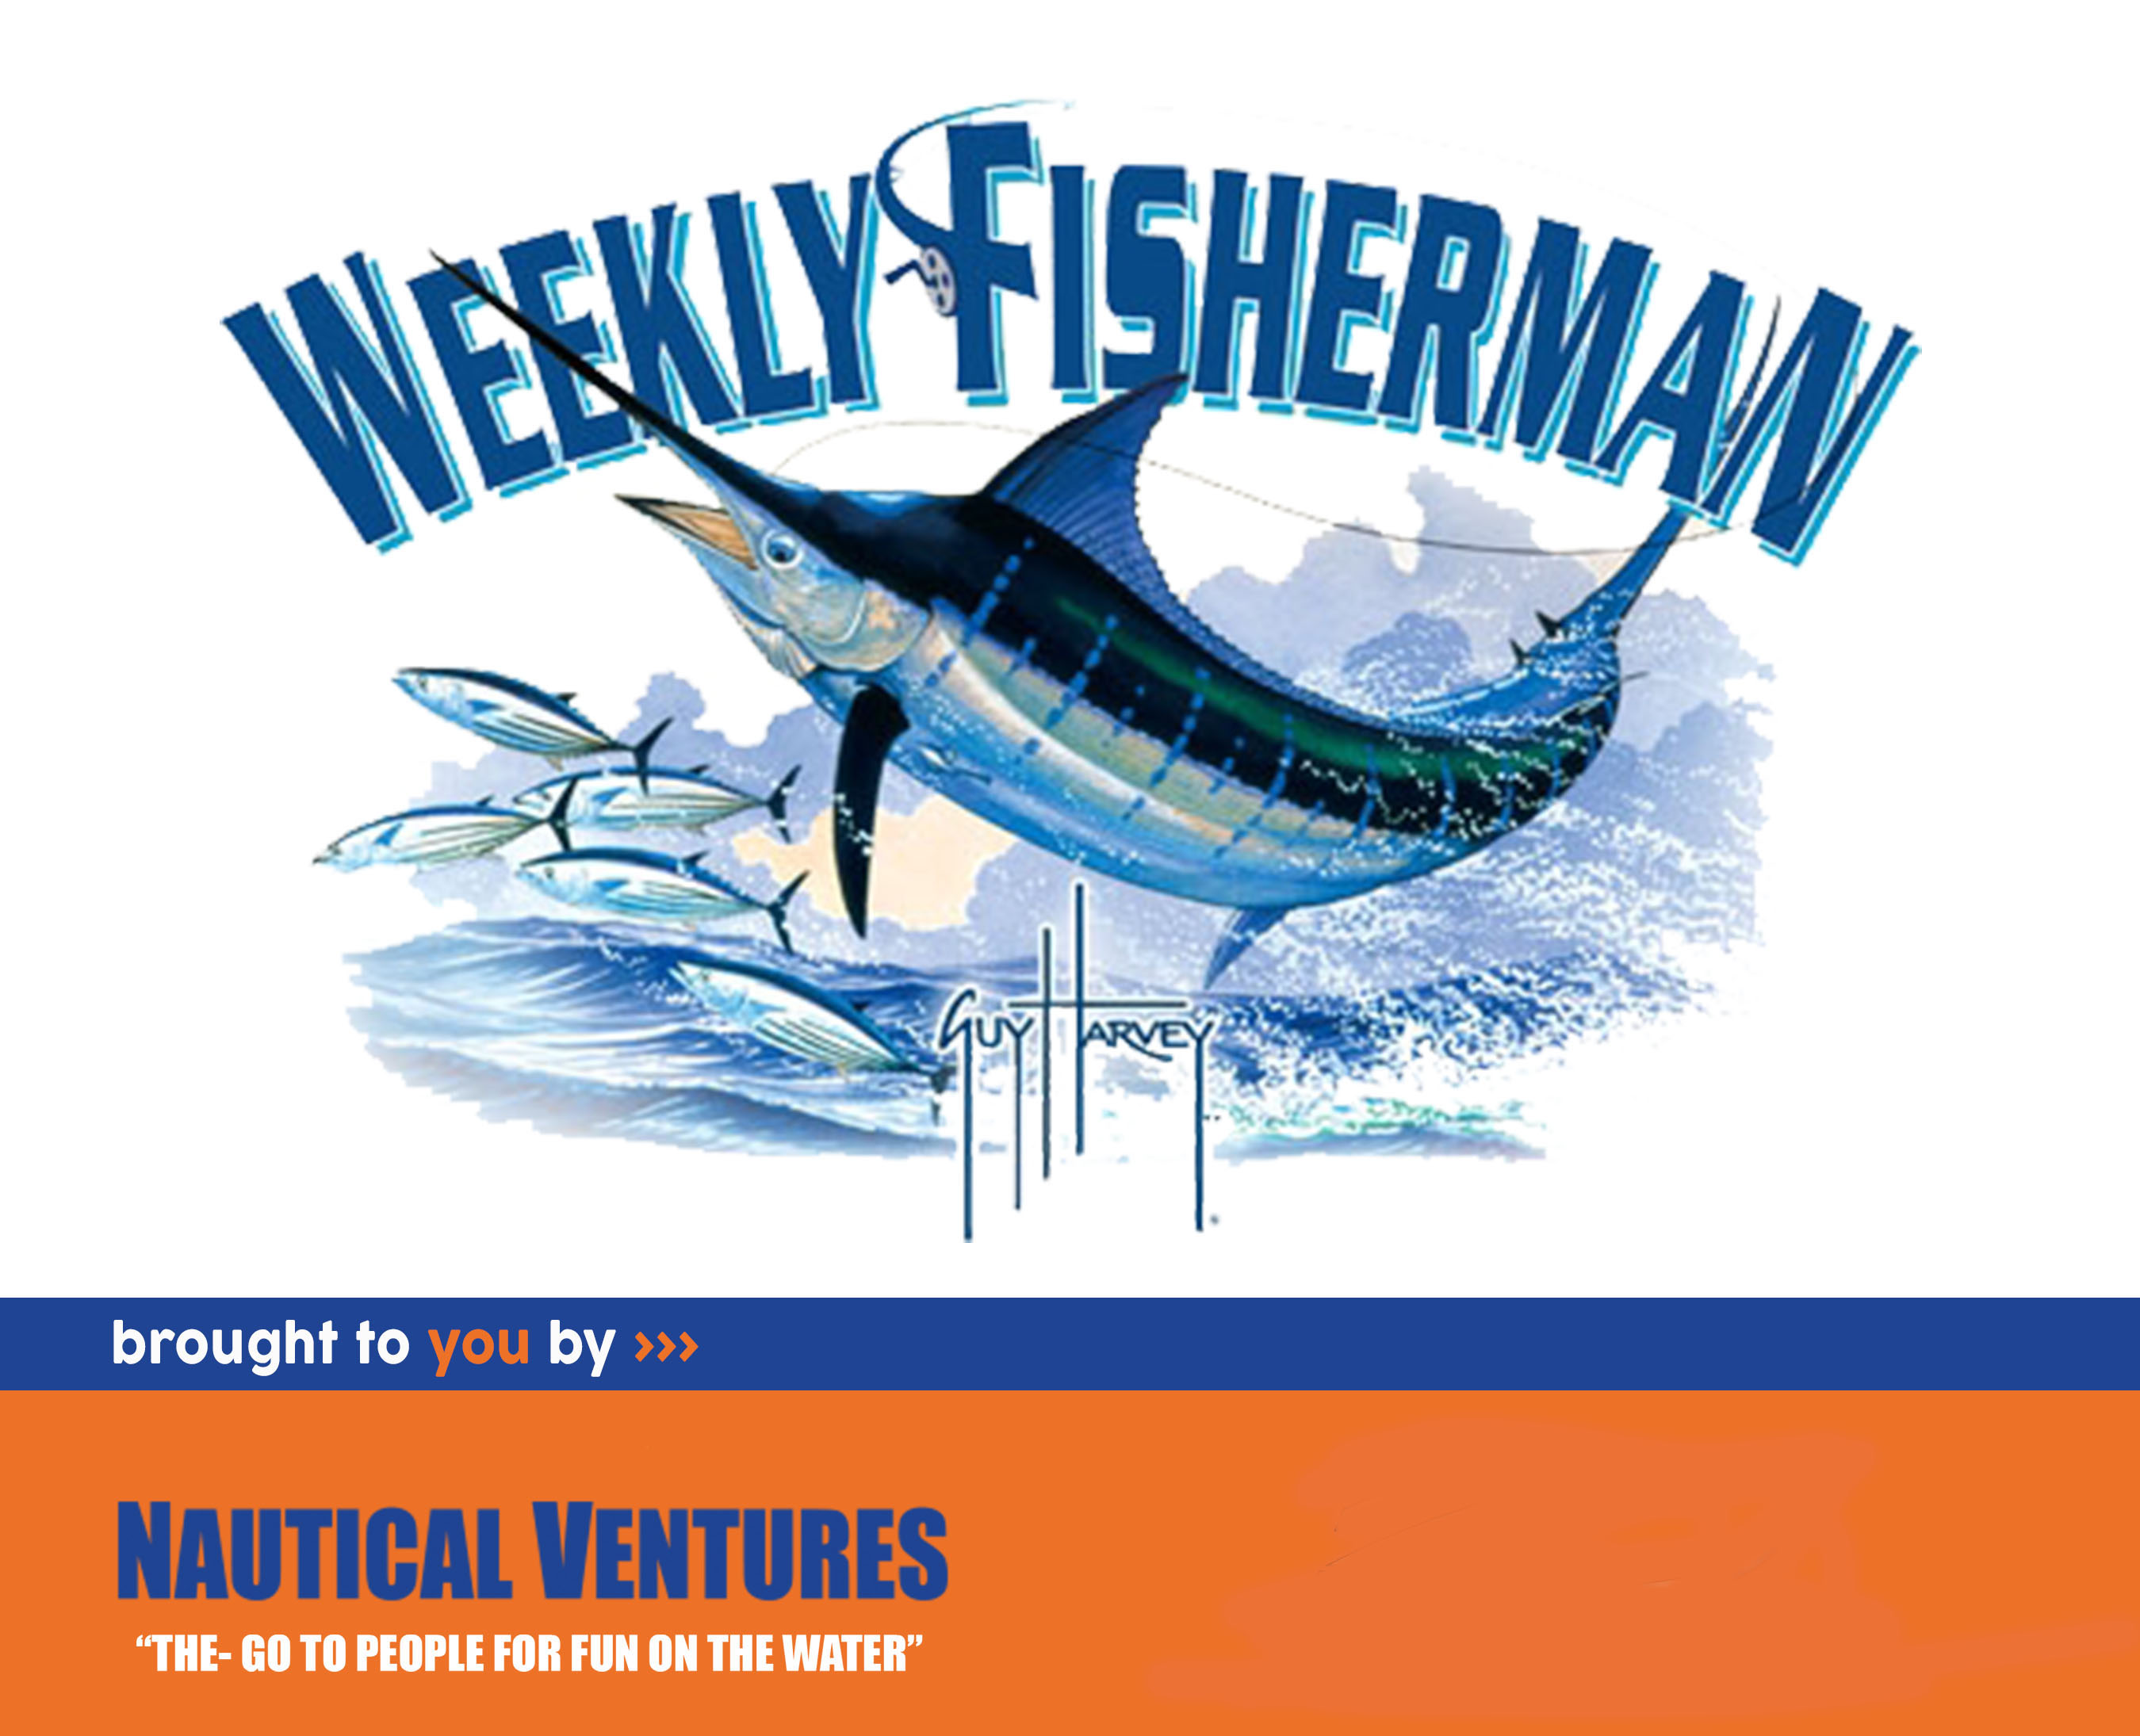 The Weekly Fisherman Show Podcast 05-21-16